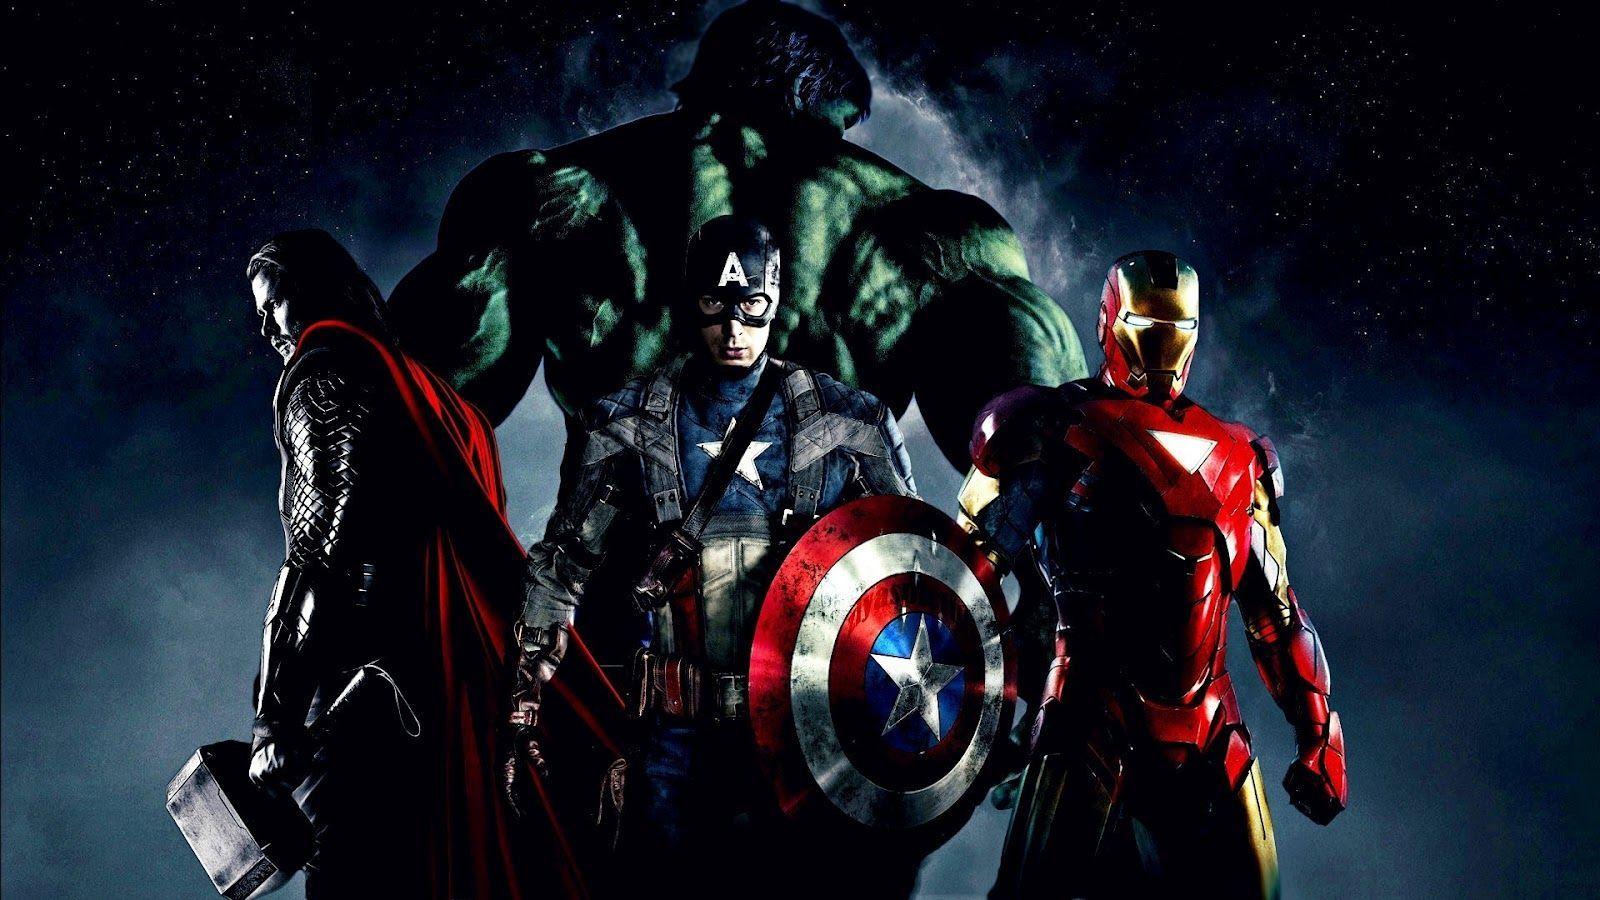 The Avengers Wallpapers